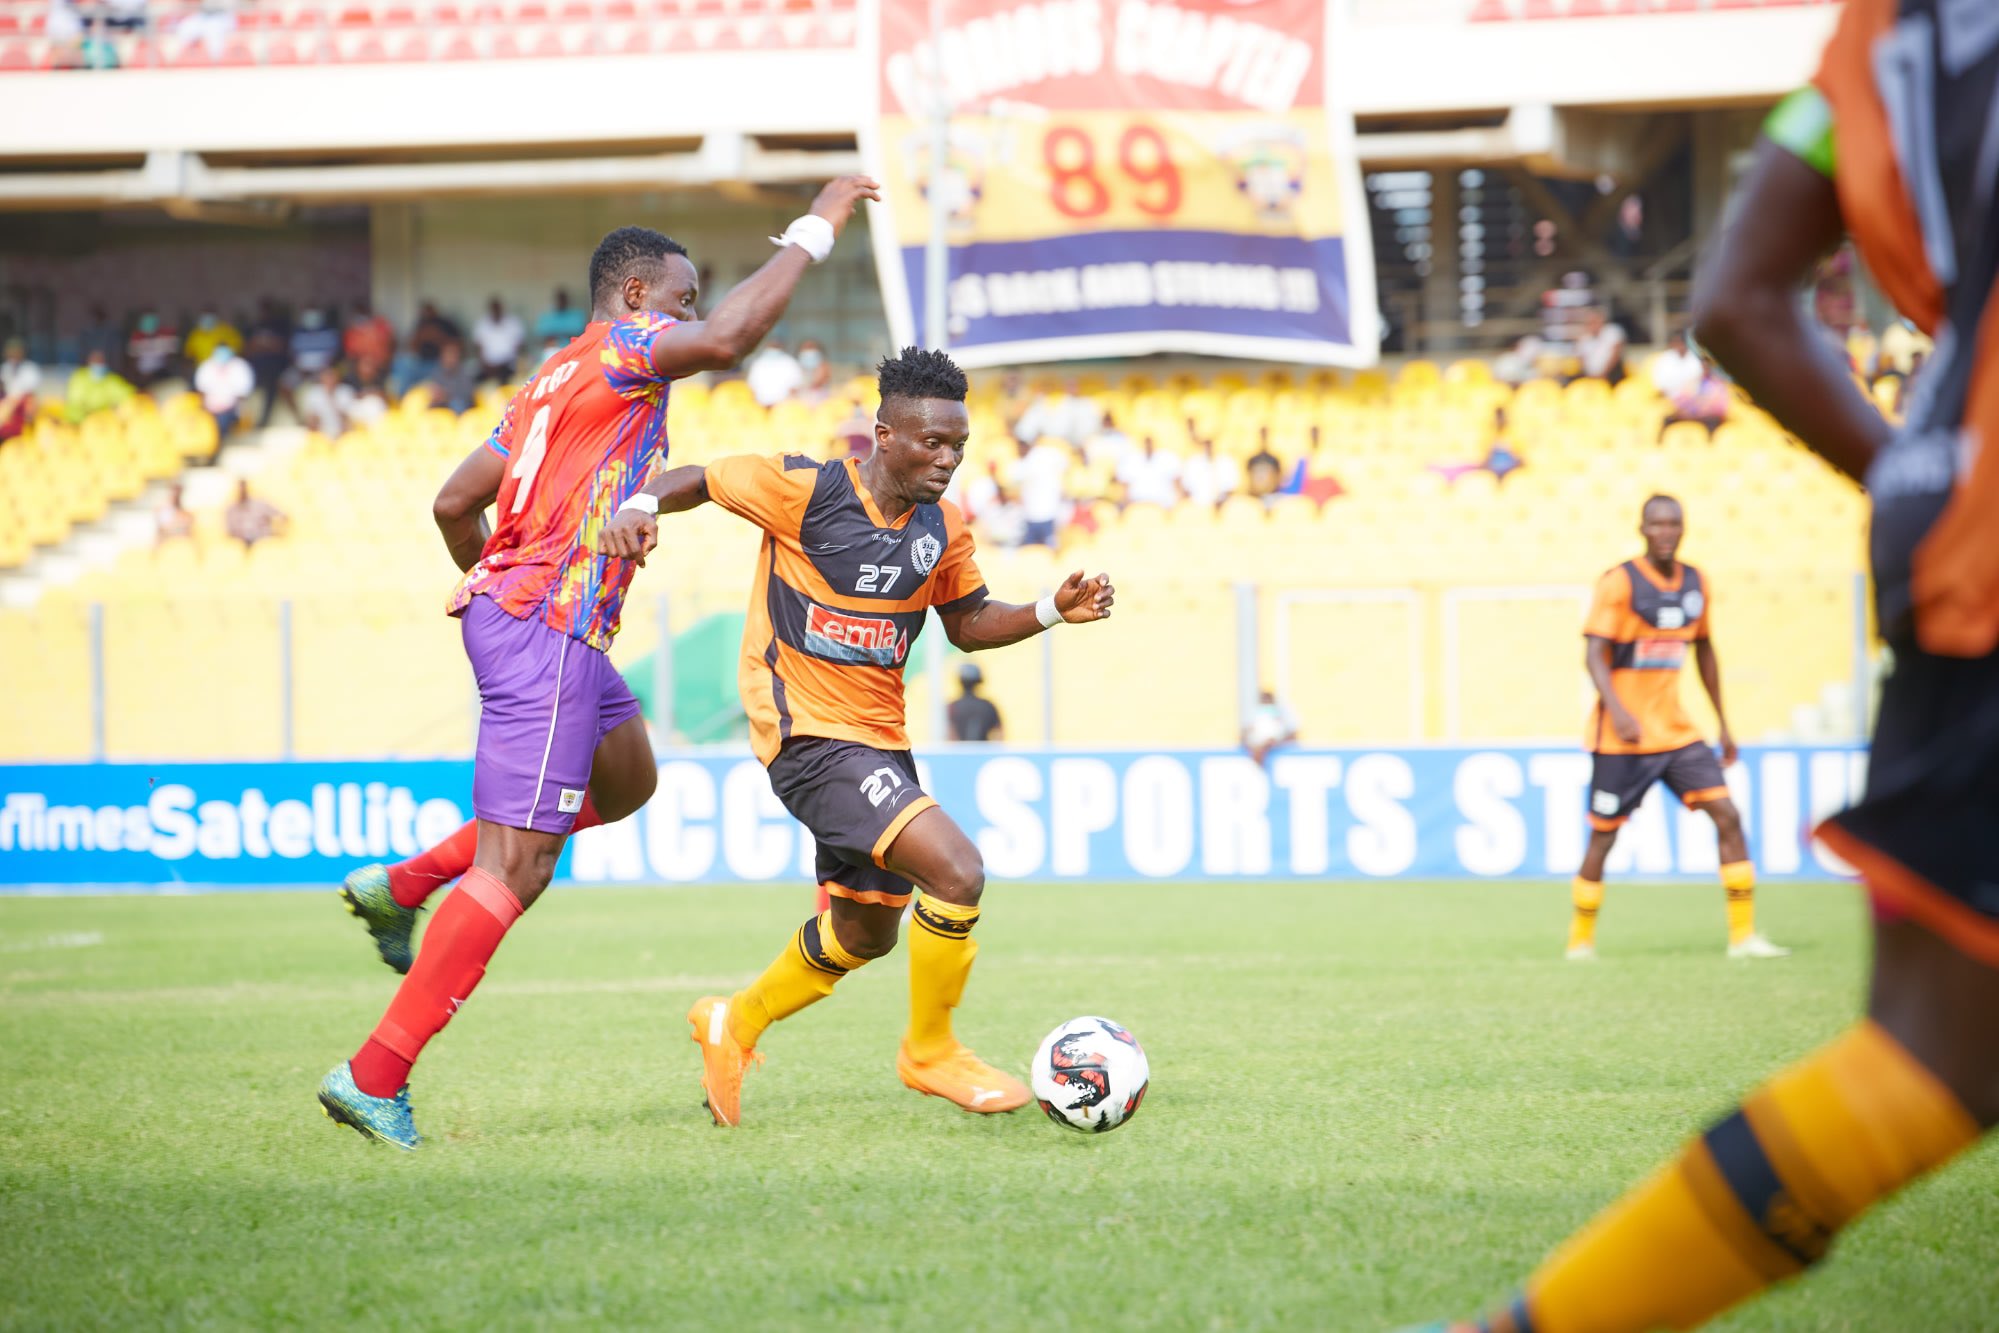 GPL Report: Hearts of Oak 0-0 Legon Cities- Phobians’ title defence gets off to shaky start